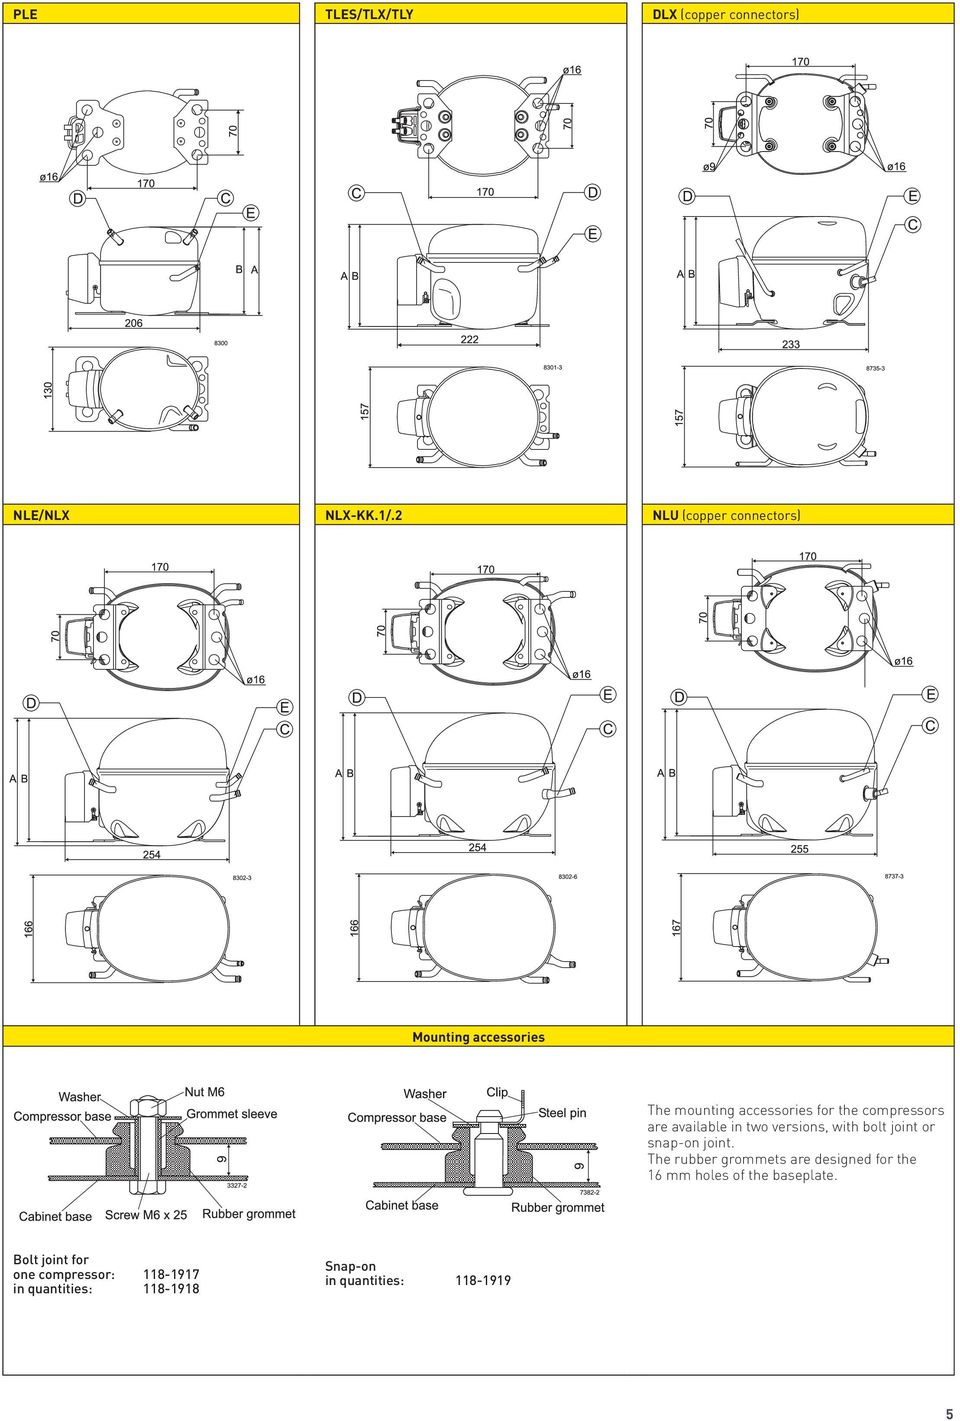 accessories The mounting accessories for the compressors are available in two versions, with